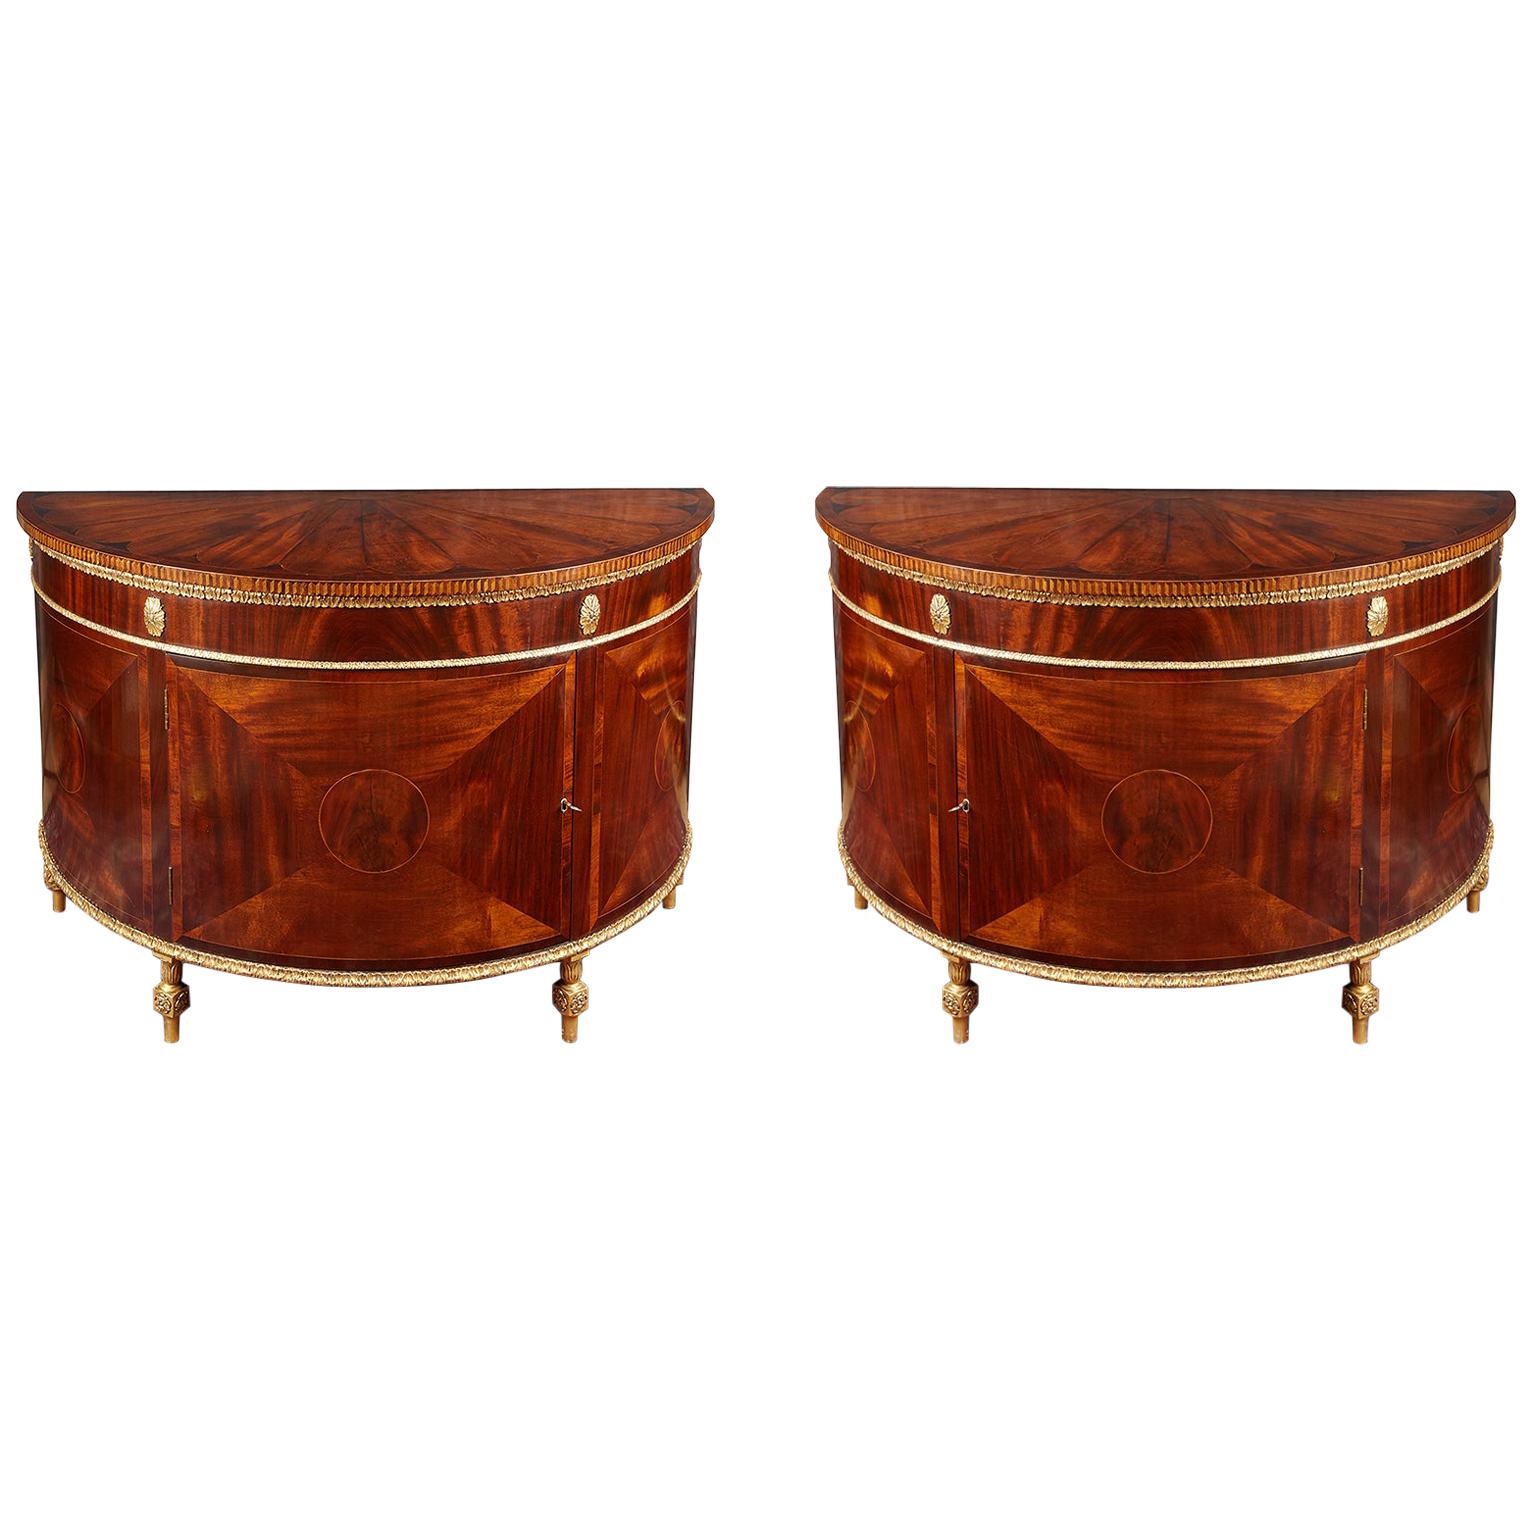 Late 18th Century George III Pair of Demilune Commodes For Sale